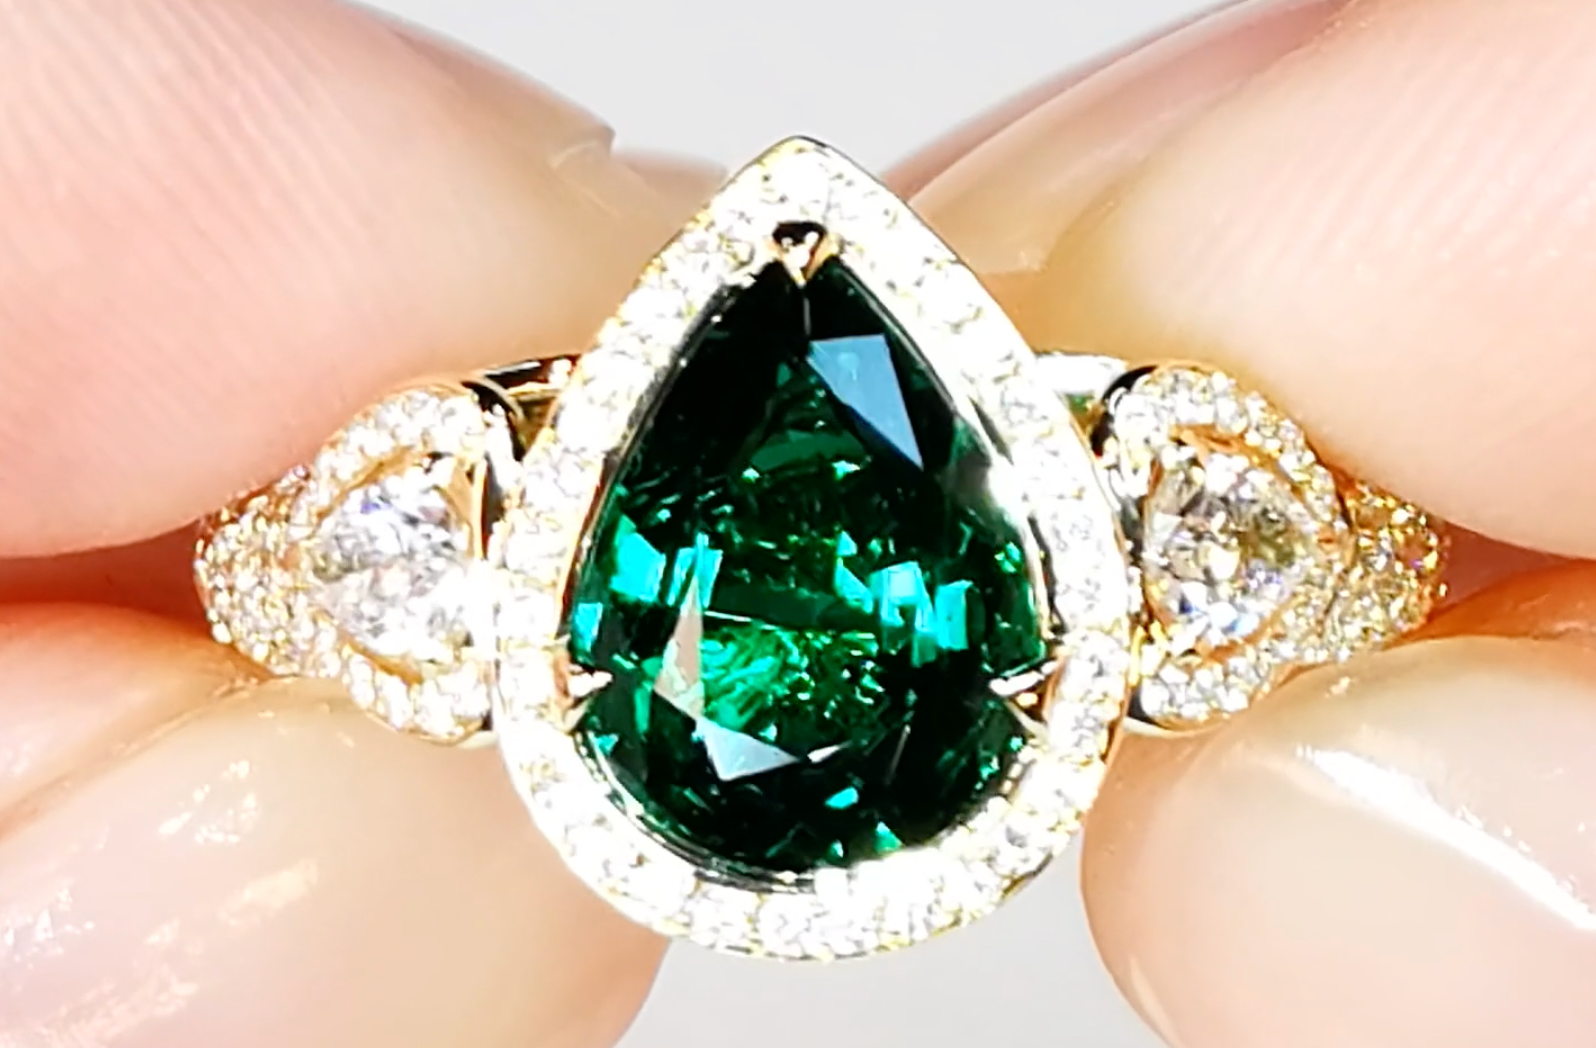 2.21ct Russian Emerald Ring with D Flawless Diamonds set in 18K Yellow Gold